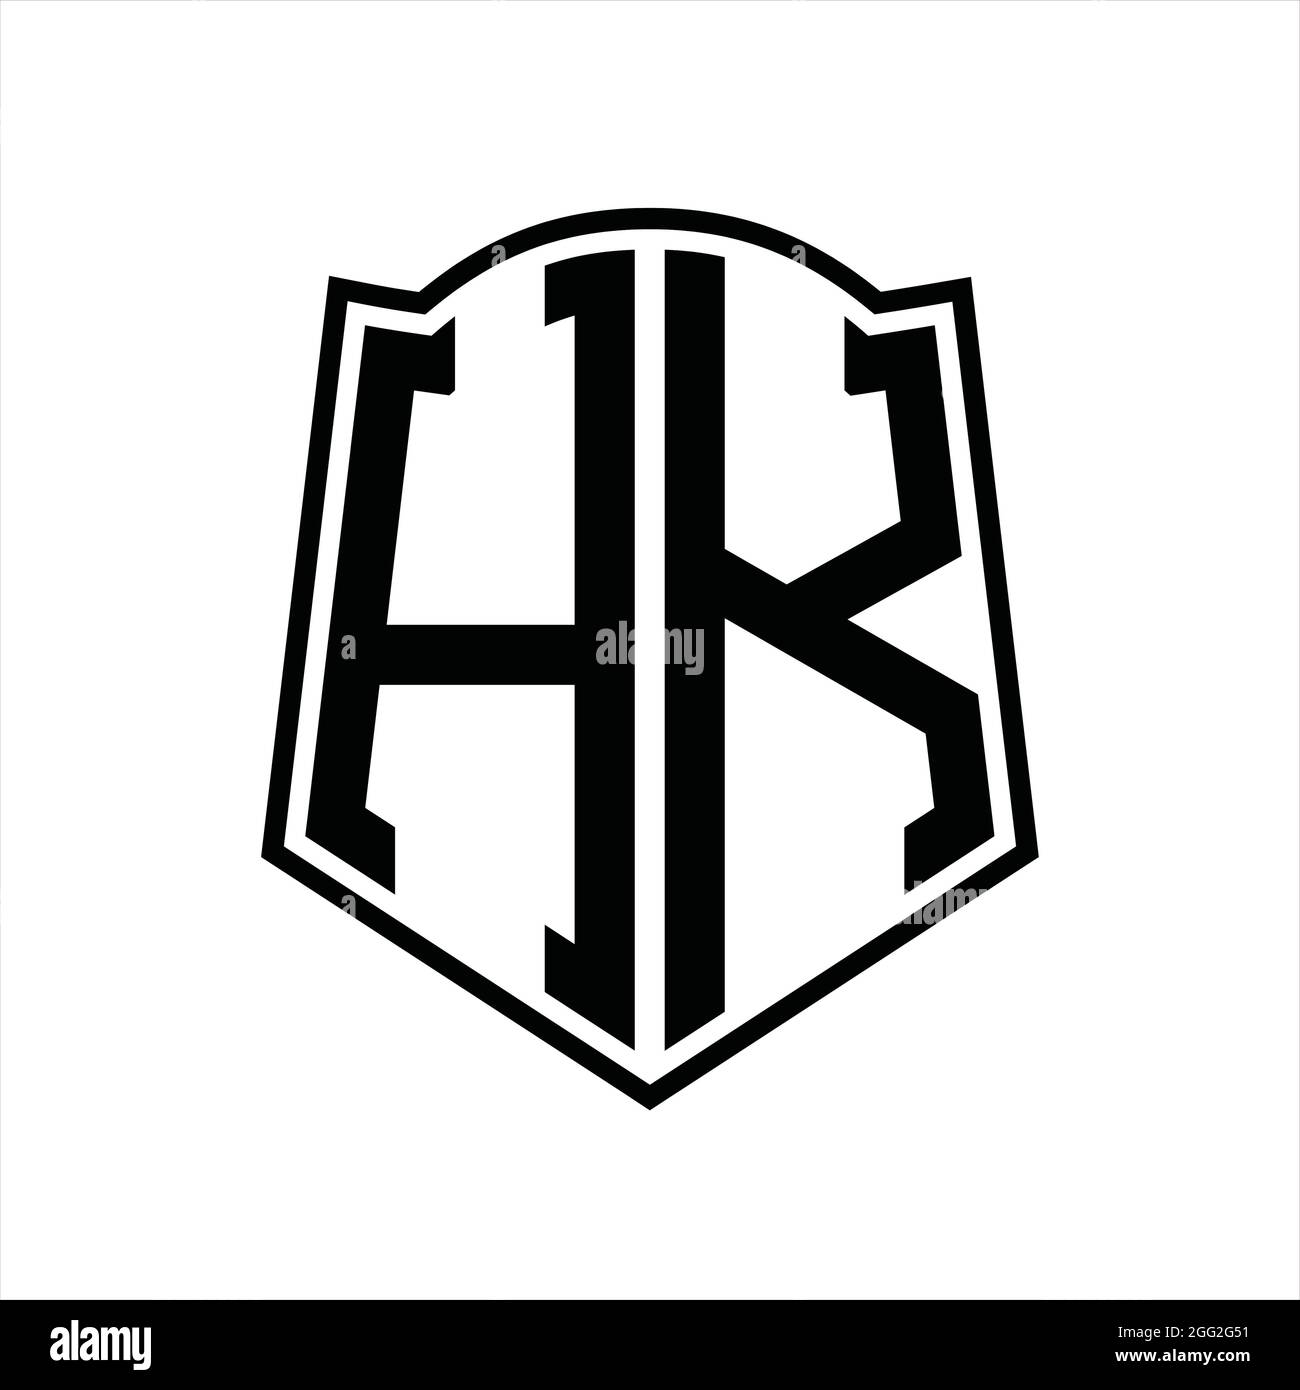 HK Logo monogram with shield shape outline design template isolated in ...